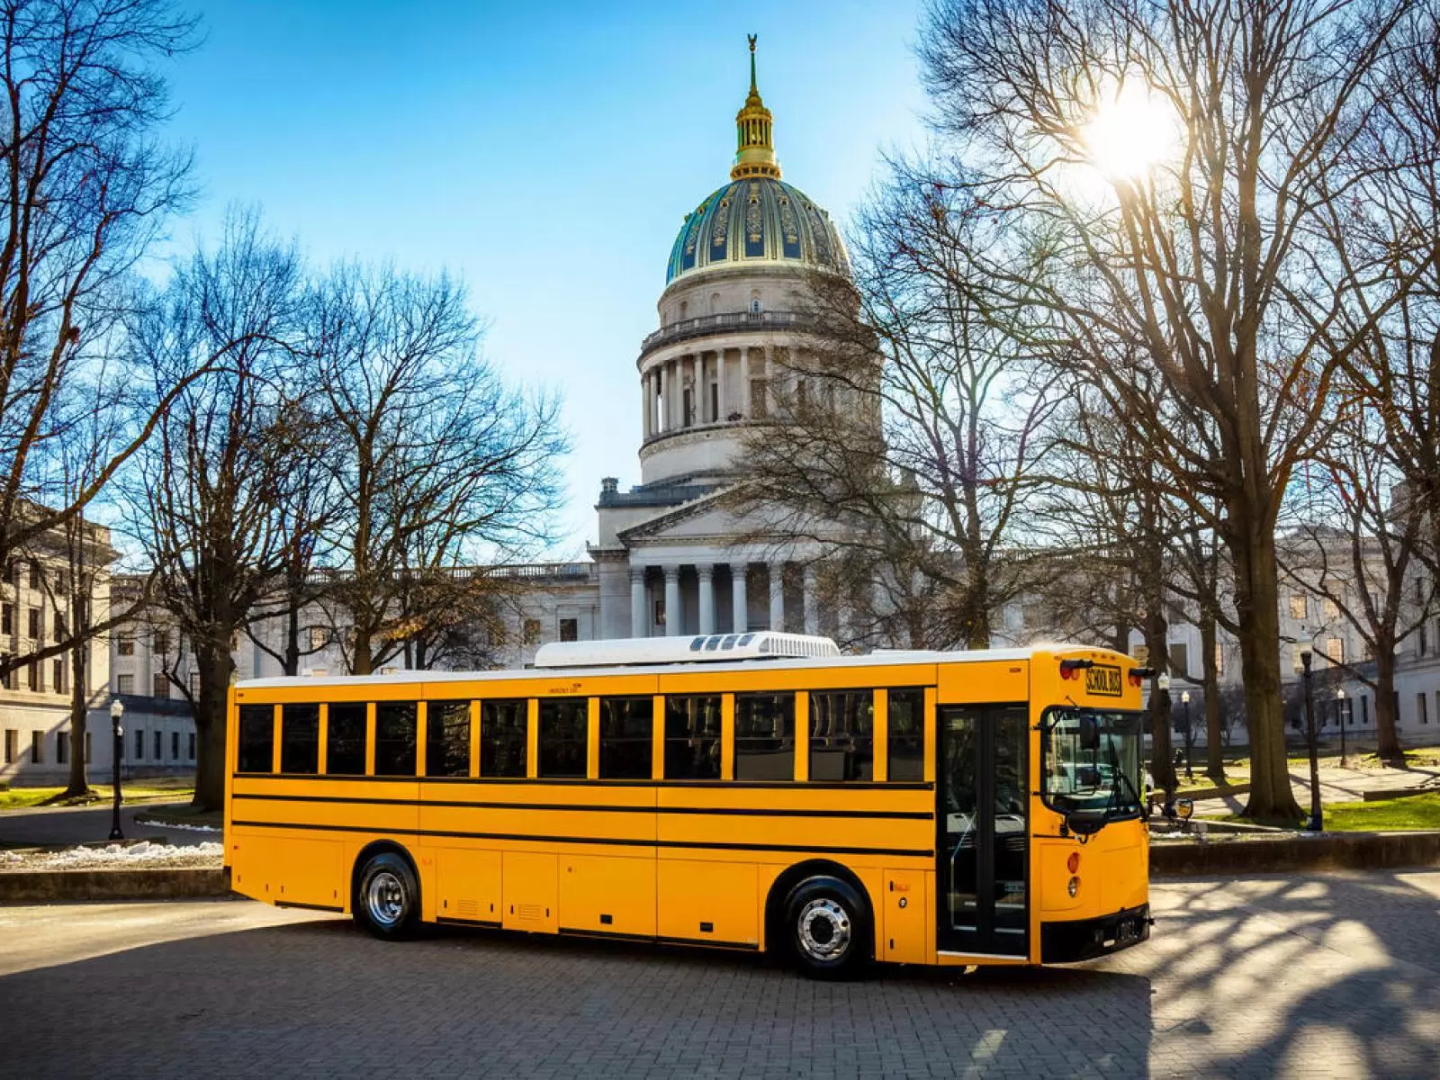 An electric yellow school bus parked in front of the U.S. Capitol building